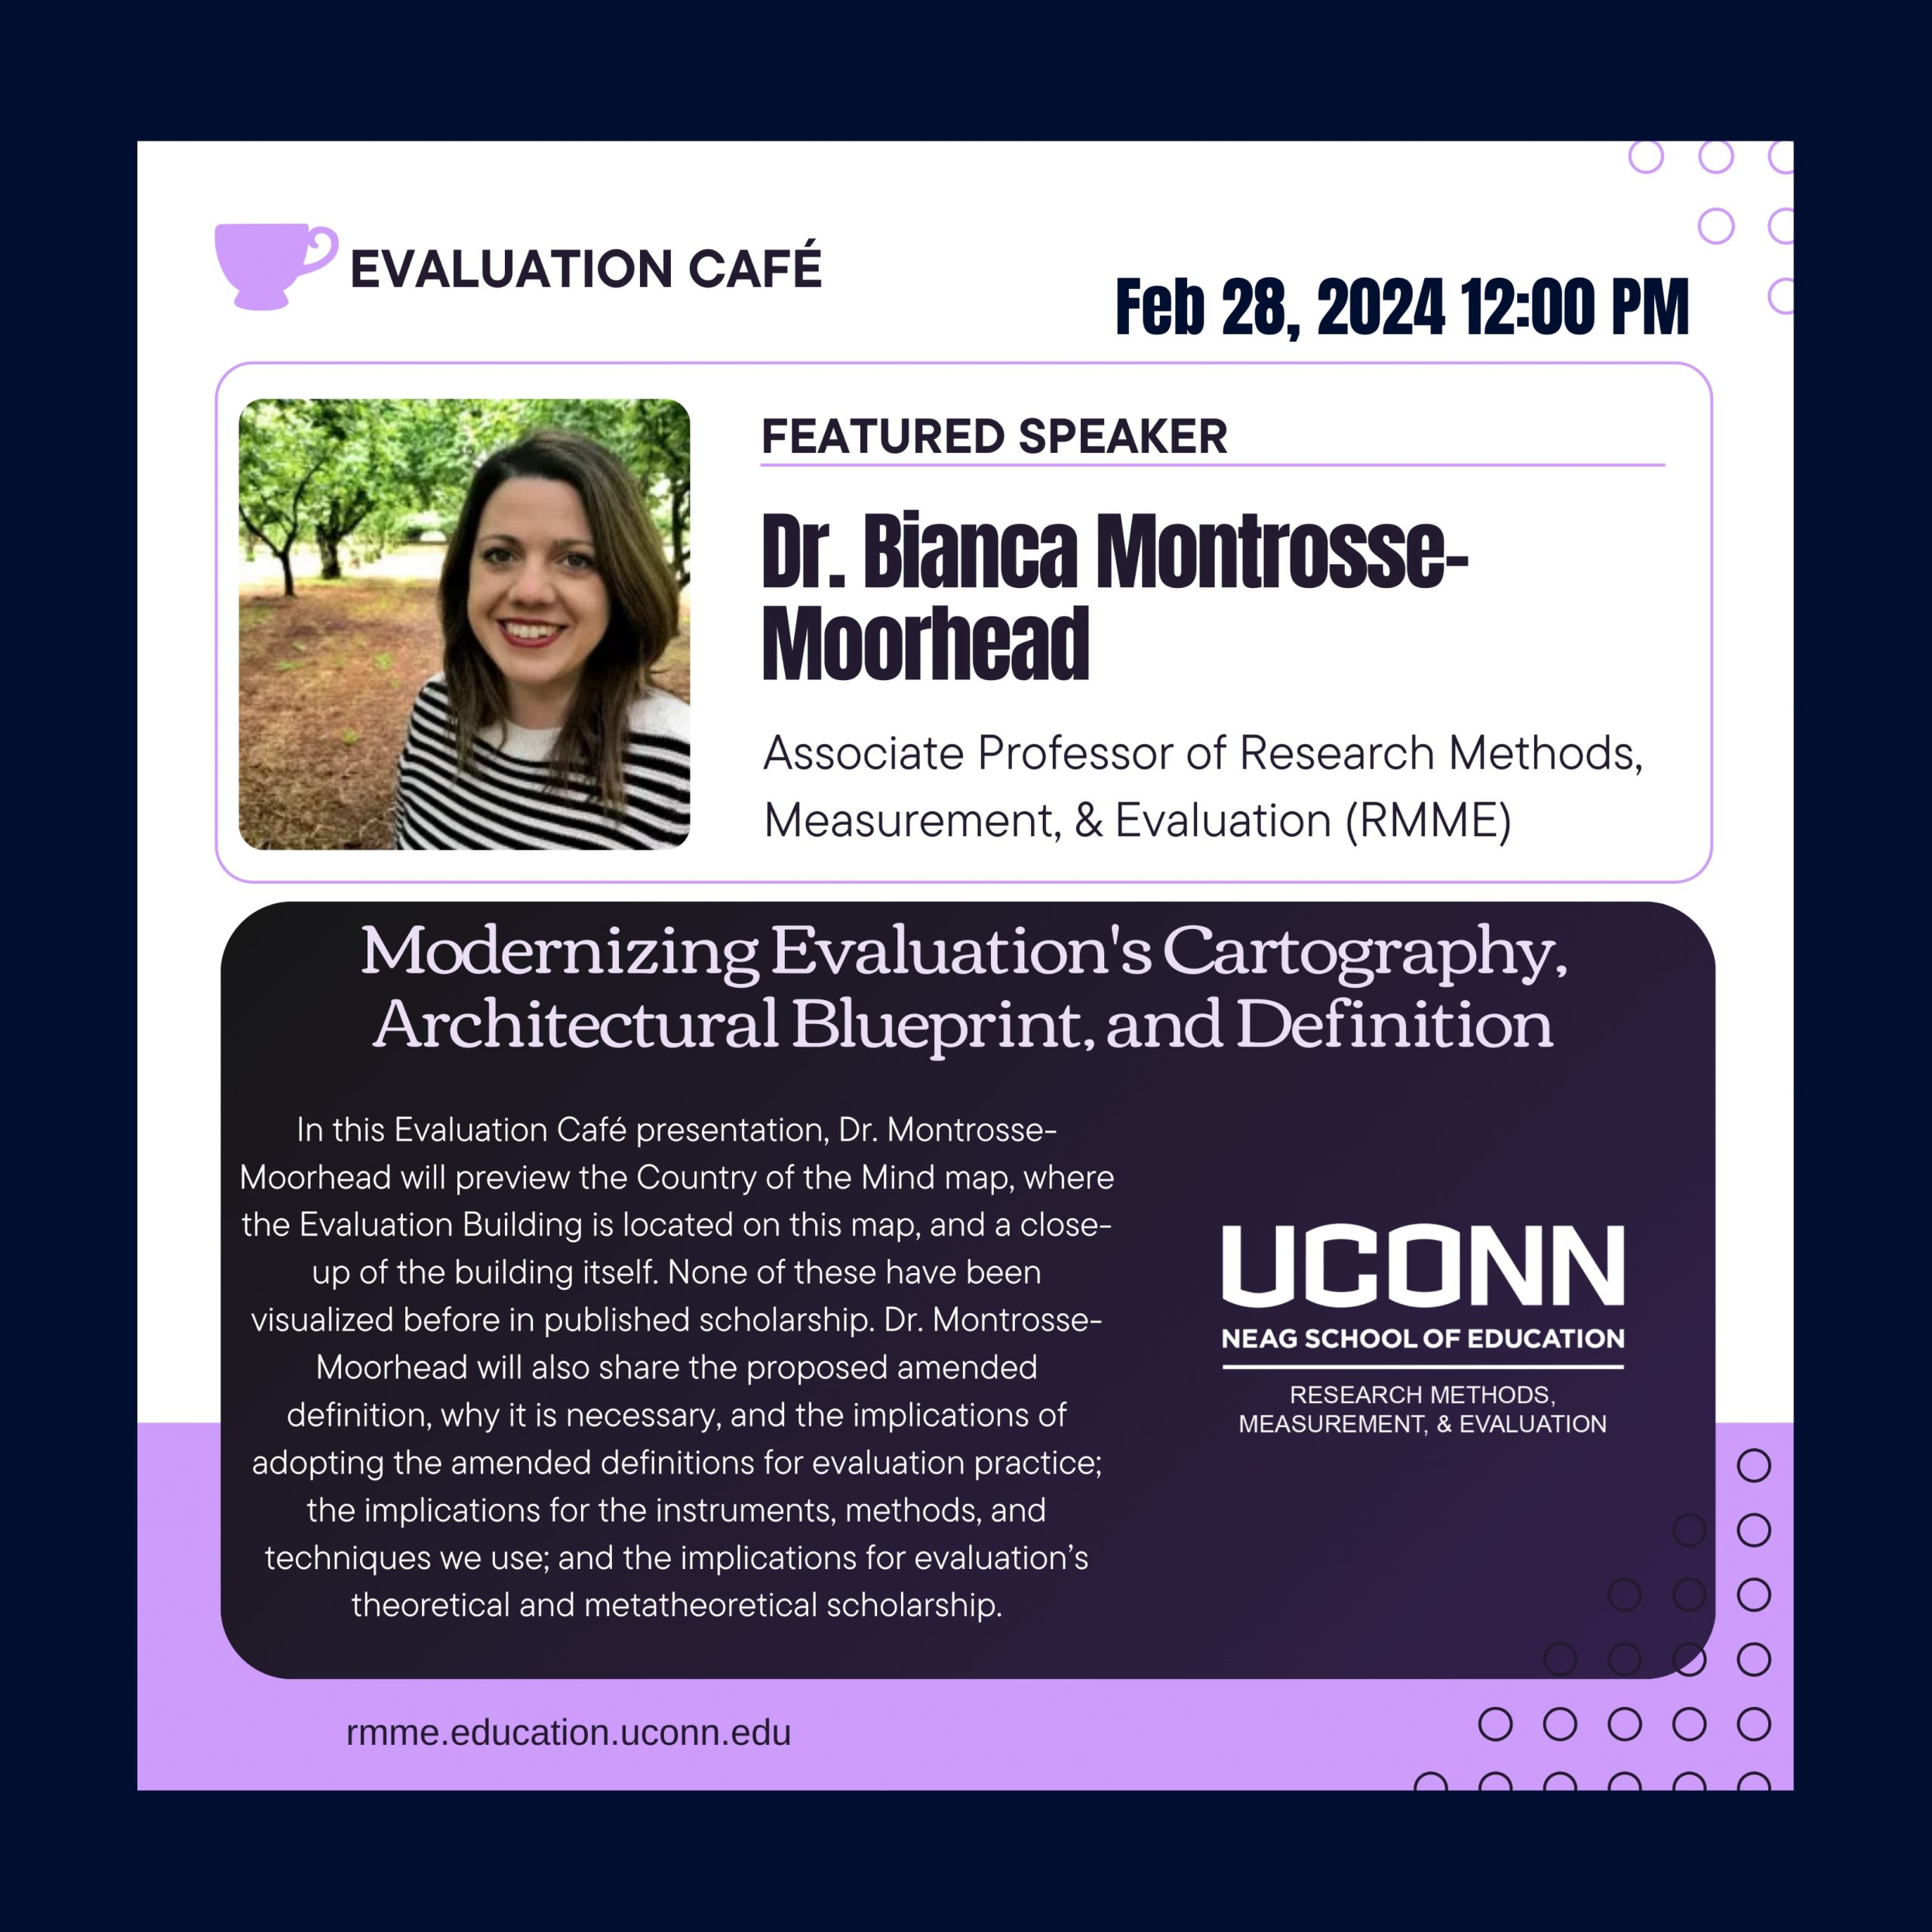 Check out Dr. Bianca Montrosse-Moorhead’s upcoming Evaluation Café talk, on Februay 28, at 12pm!